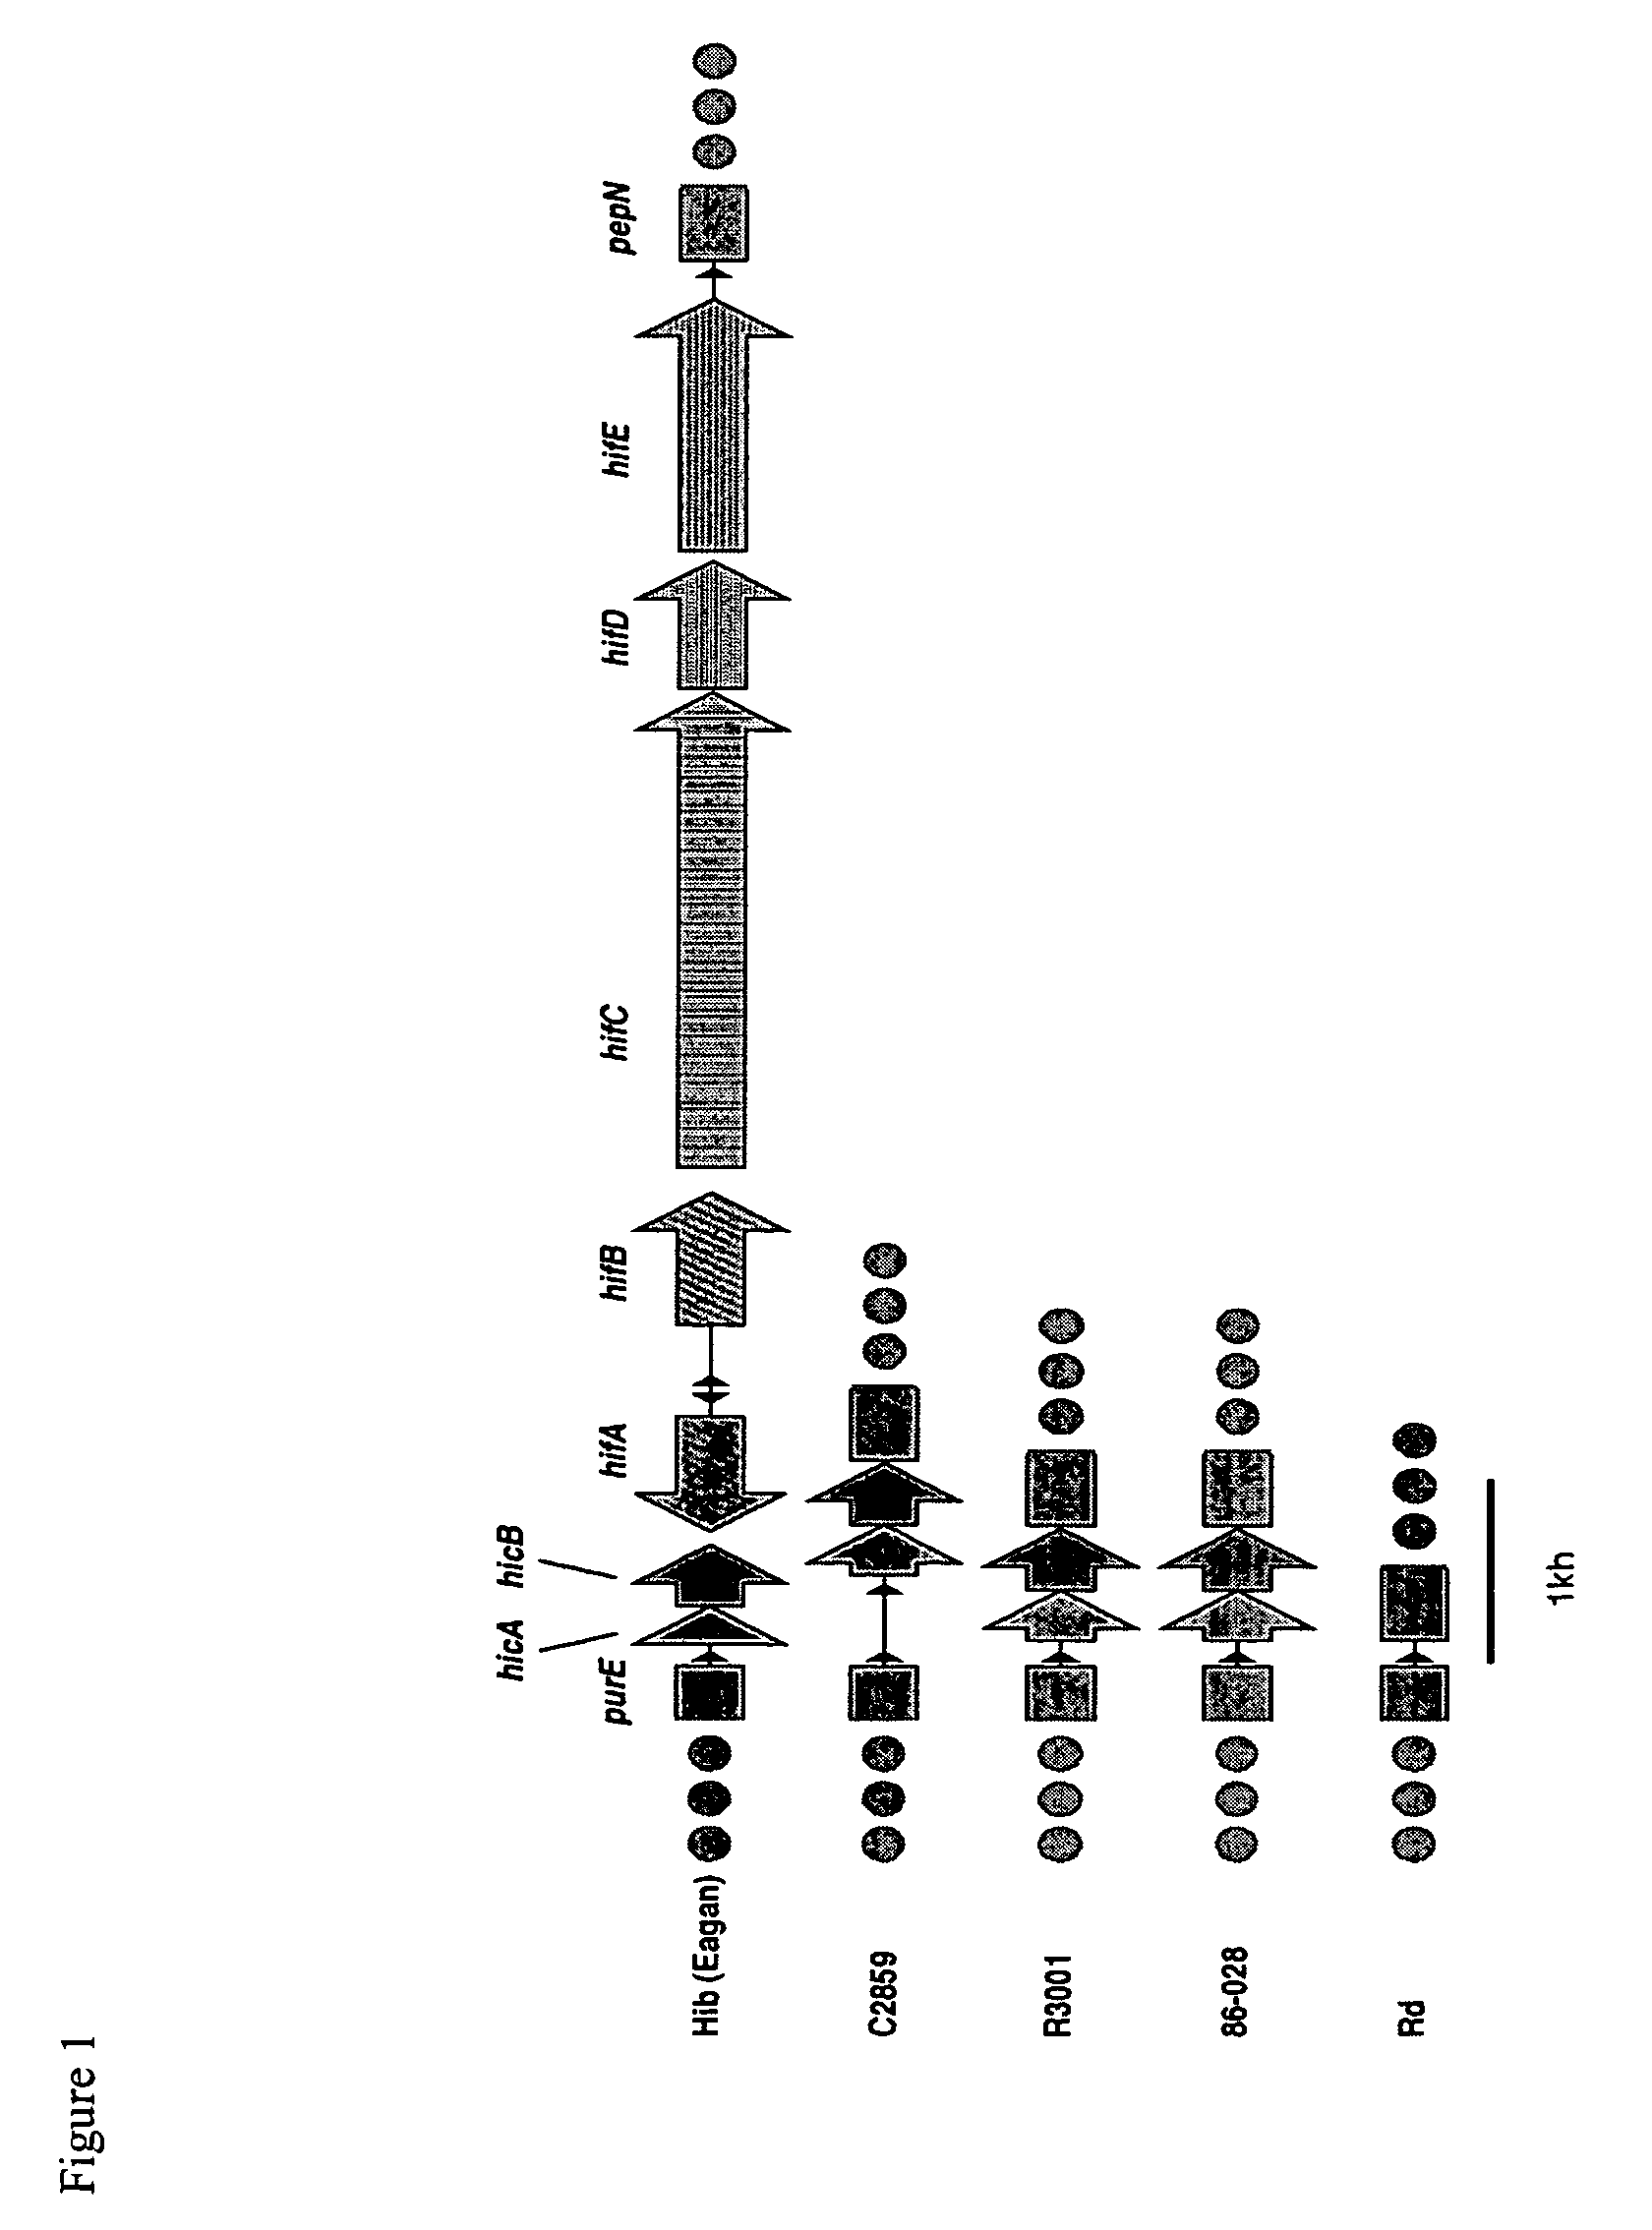 Polypeptide encoded by a nucleotide sequence of a nontypeable strain of <i>Haemophilus influenzae </i>genome